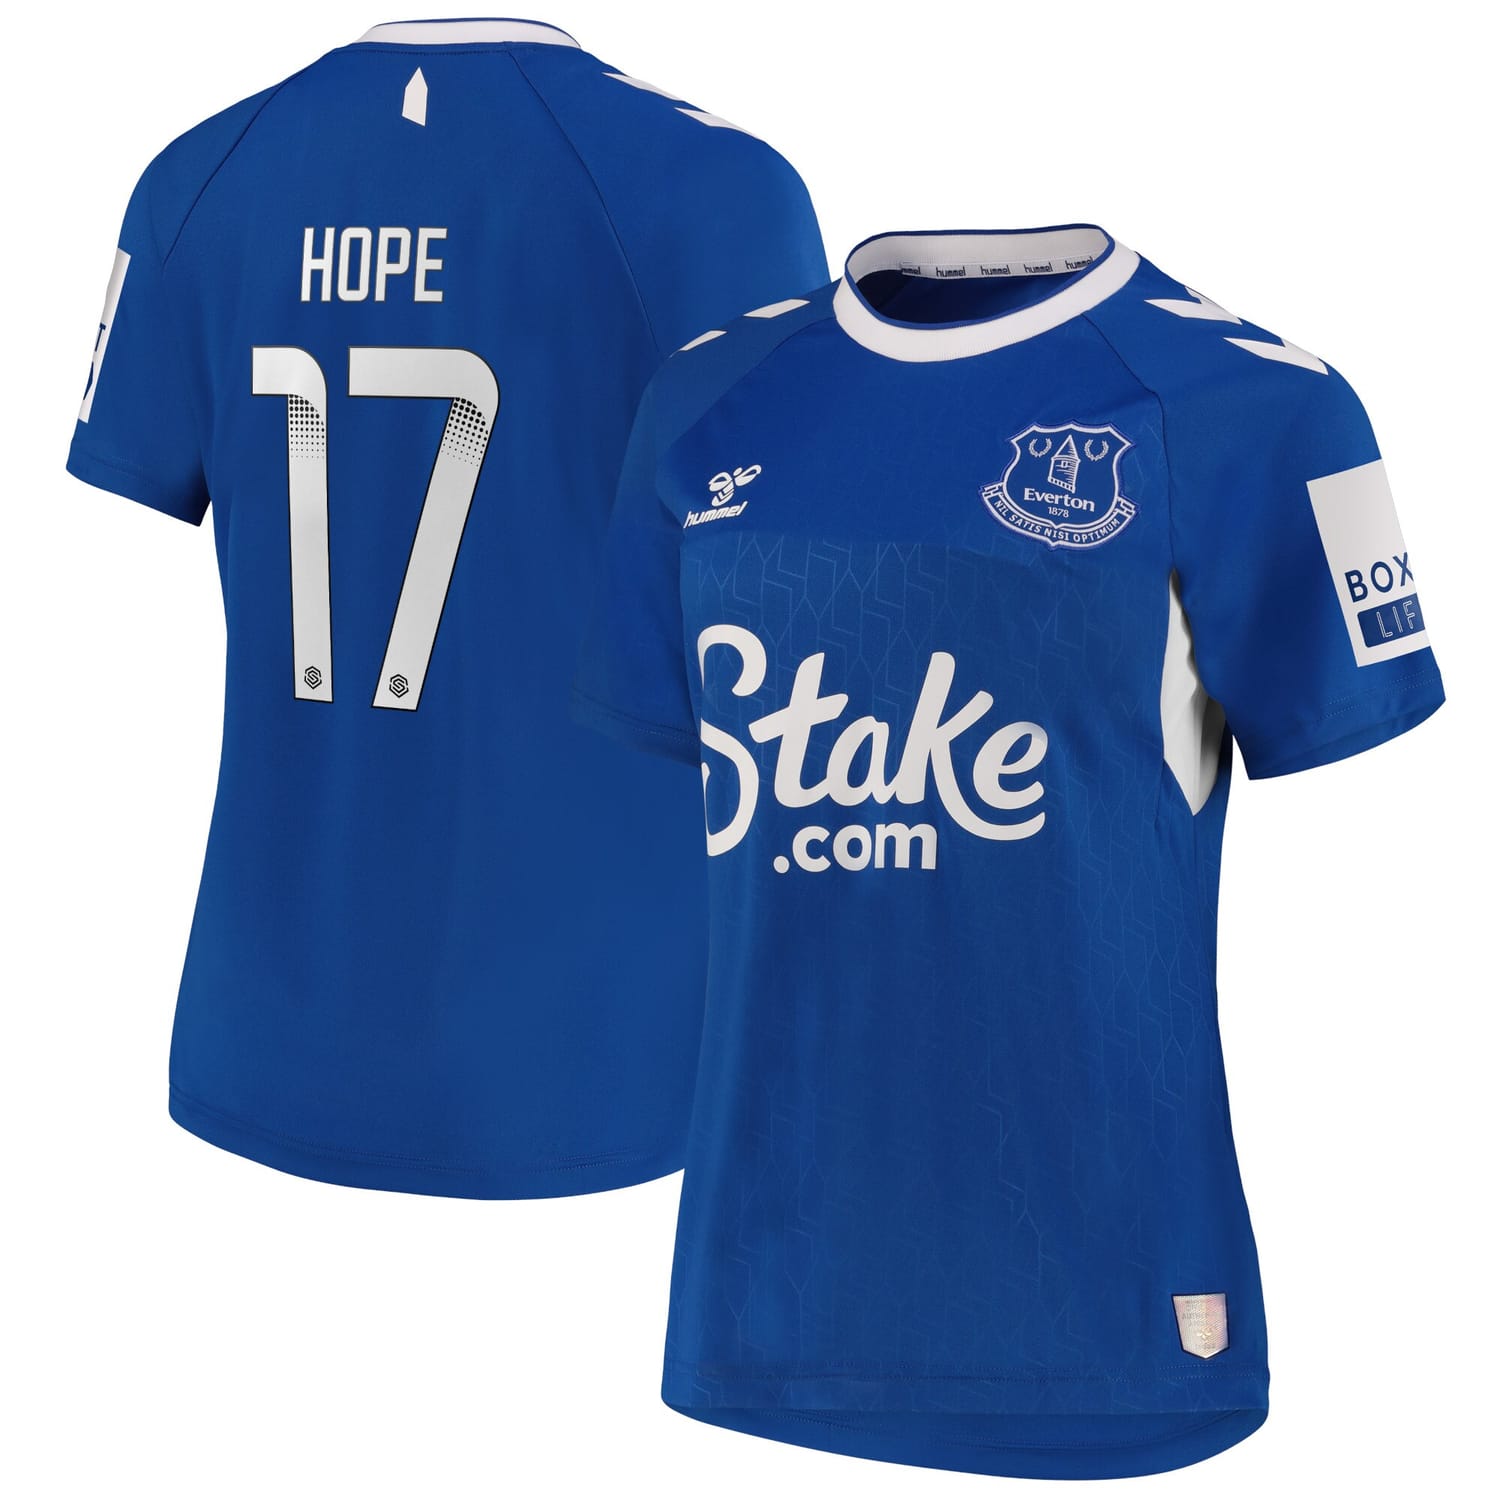 Premier League Everton Home Jersey Shirt 2022-23 player Lucy Hope 17 printing for Women